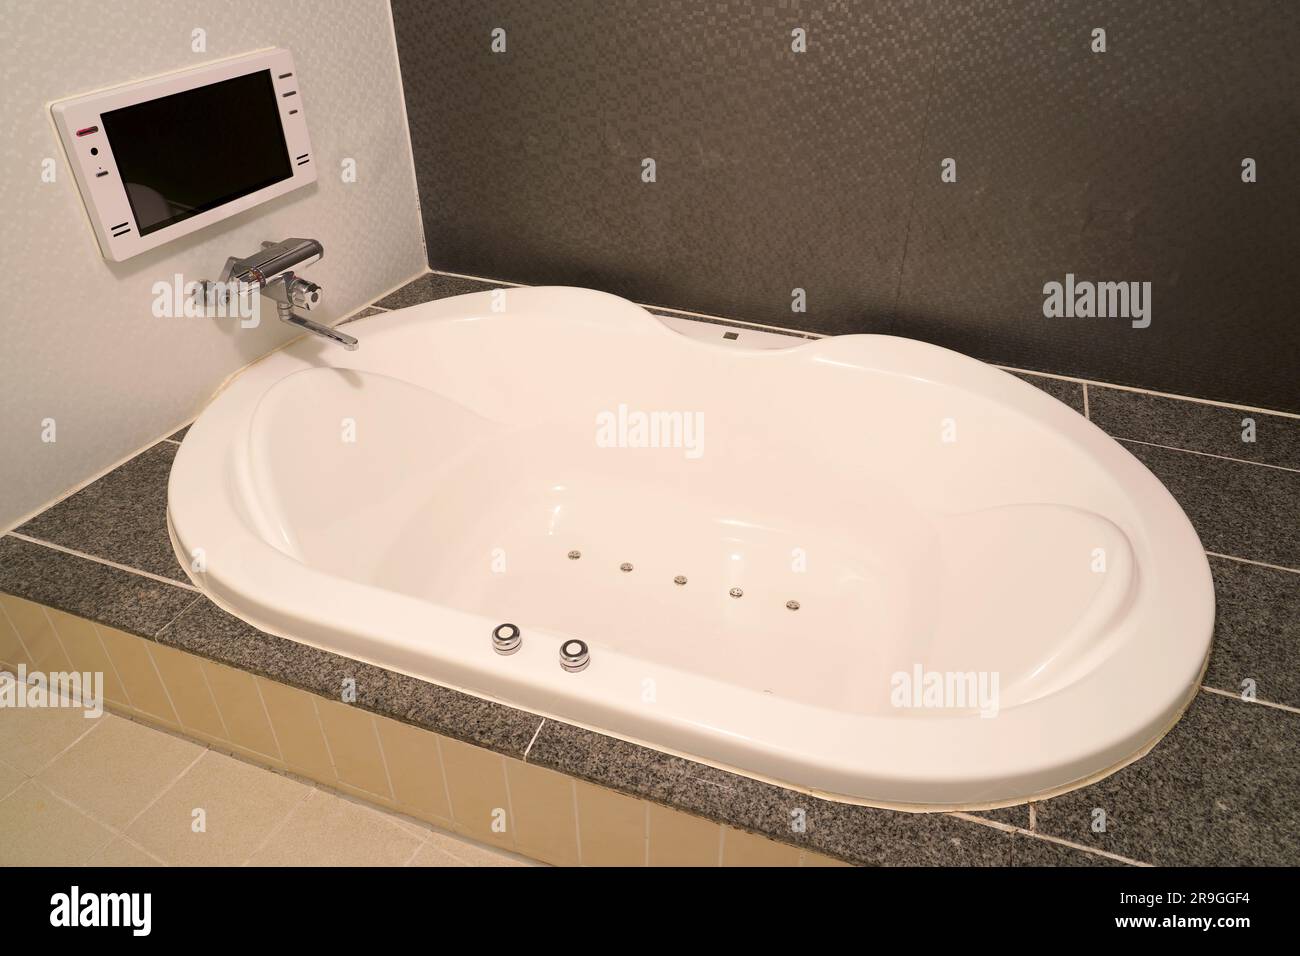 Japanese style bathroom image with brown tiles Stock Photo